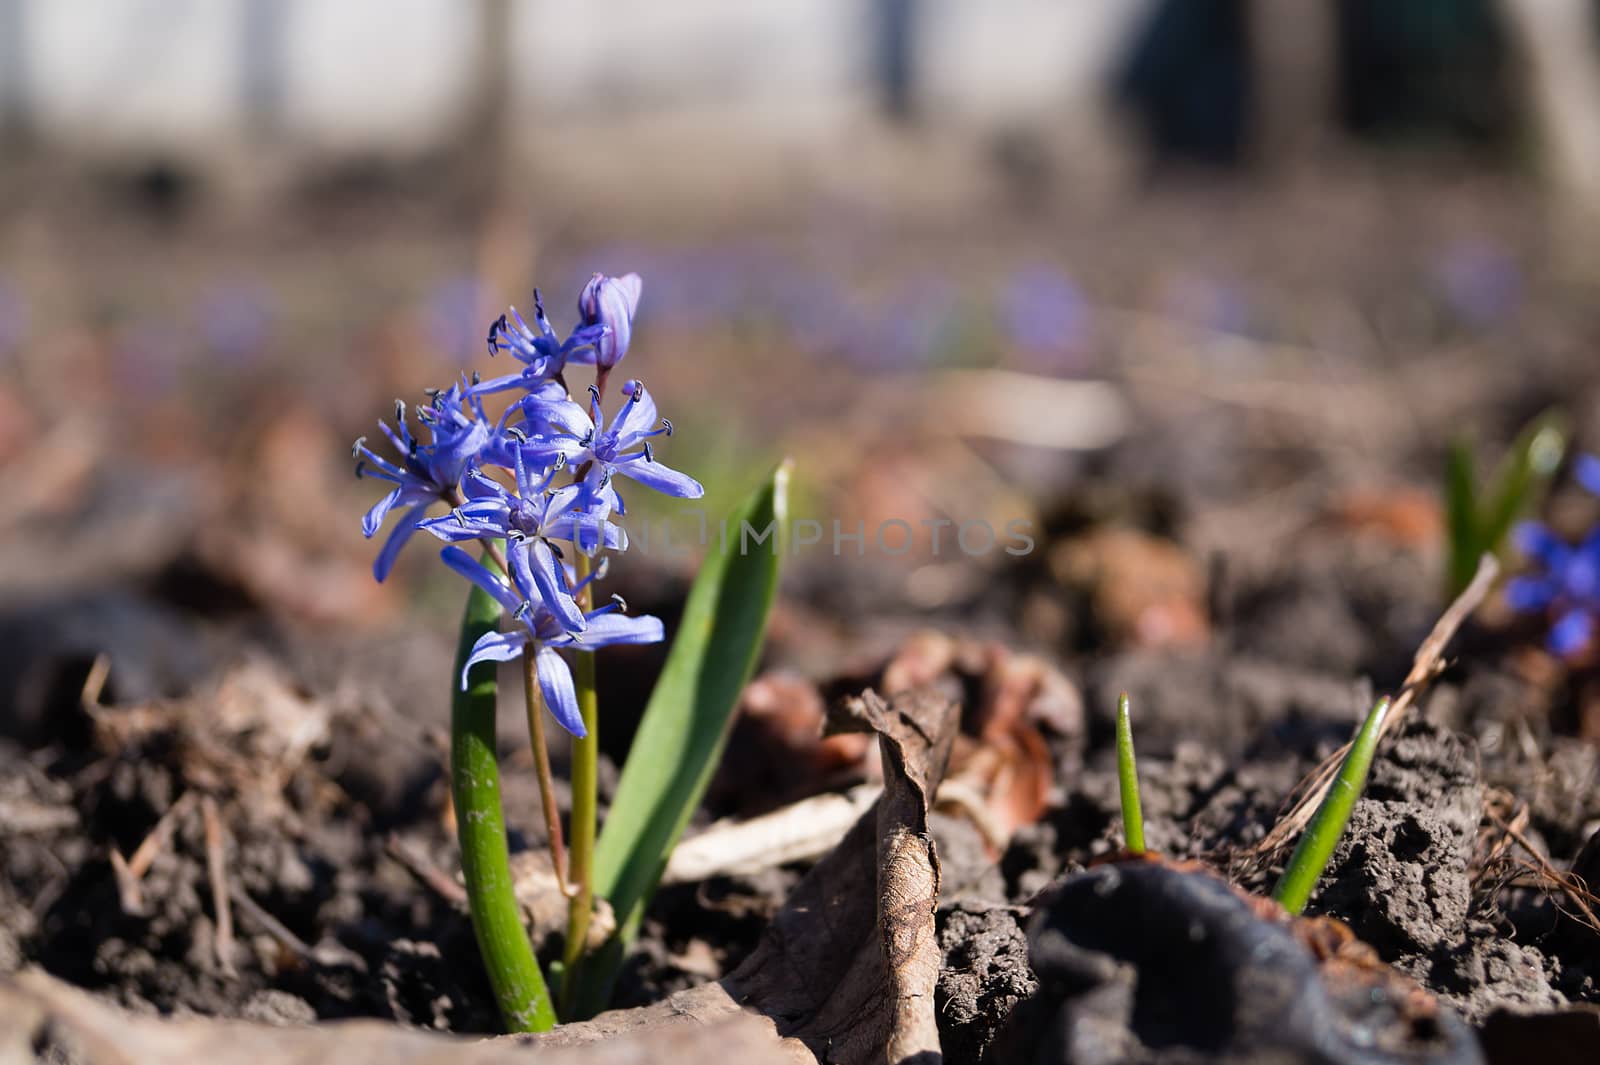 Bluebell flowers in the spring garden close up. Background is brurred. by alexsdriver